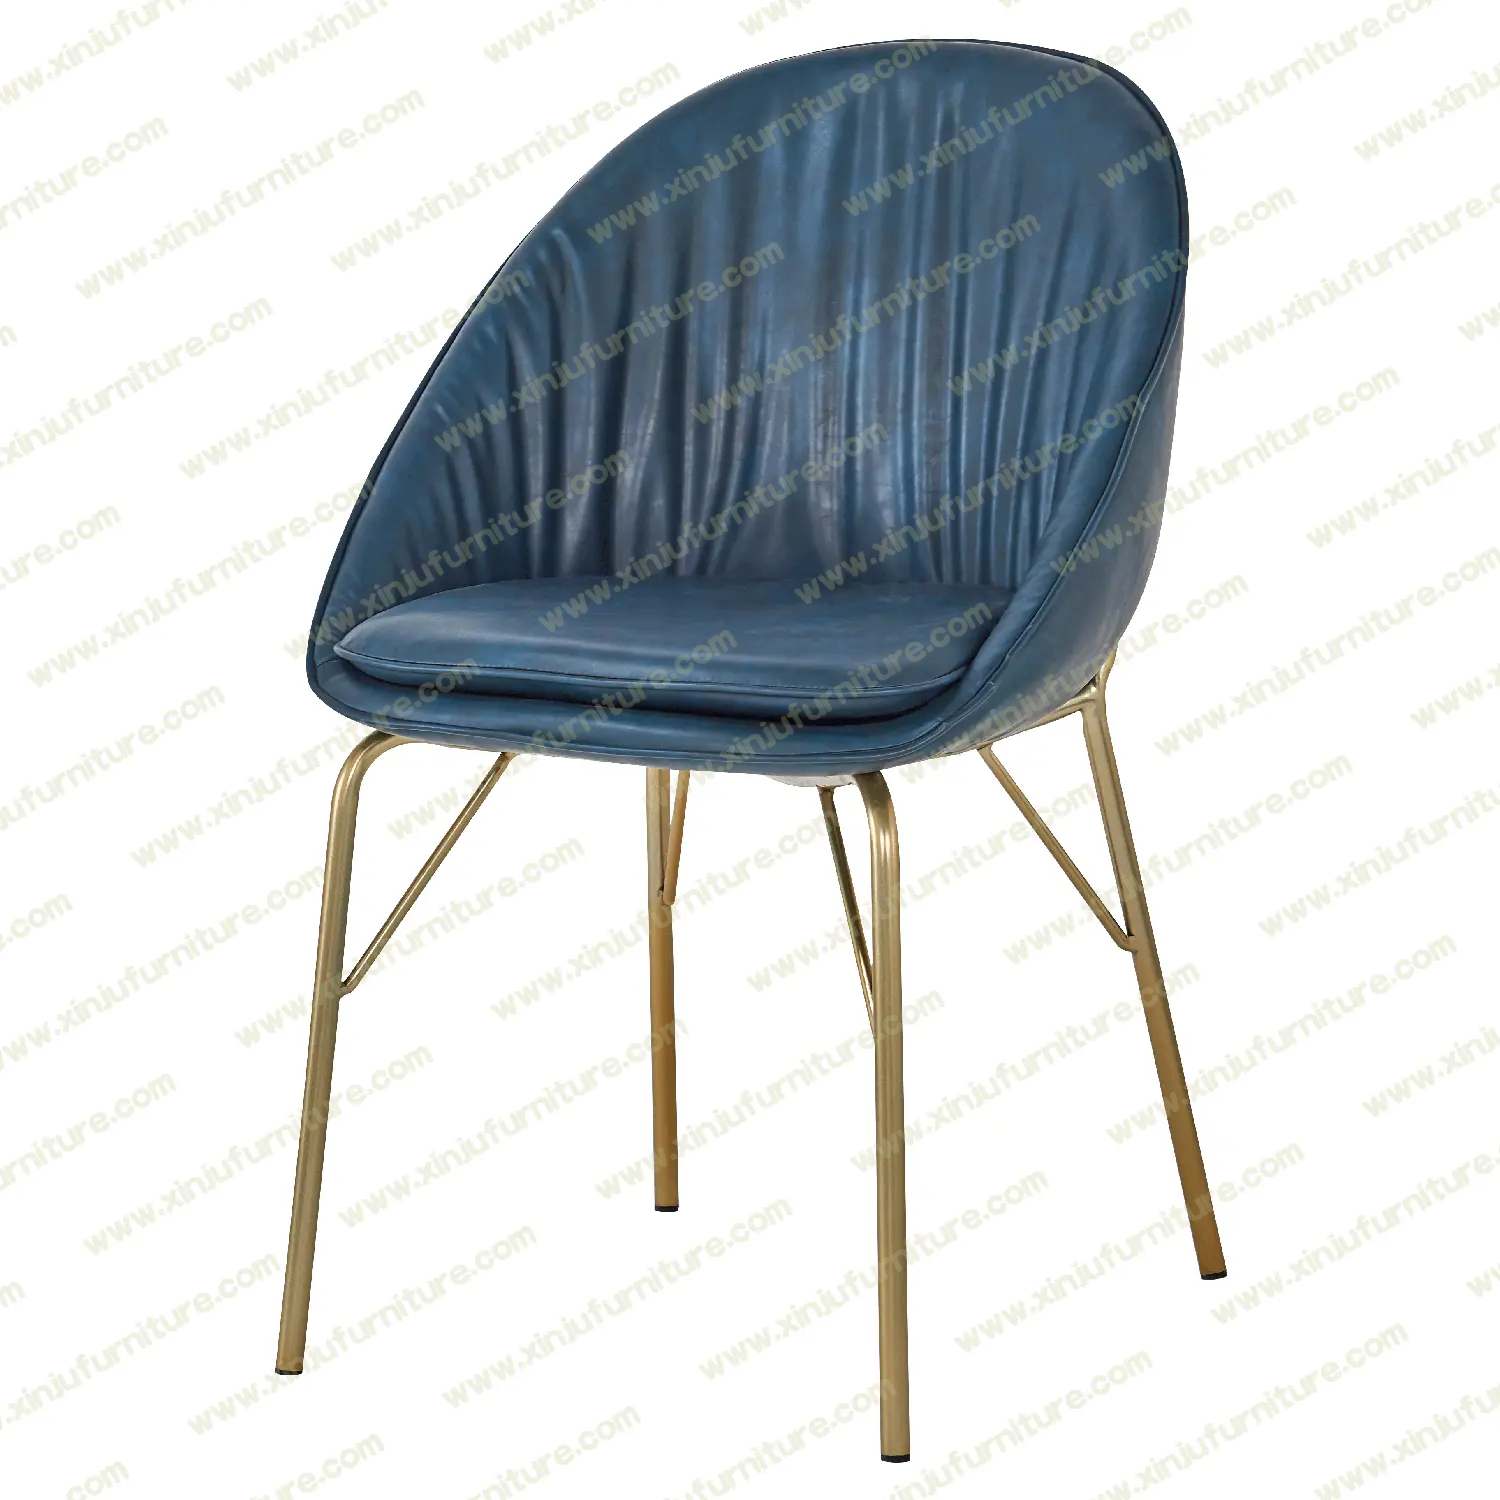 Simple design comfortable cushion dining chair